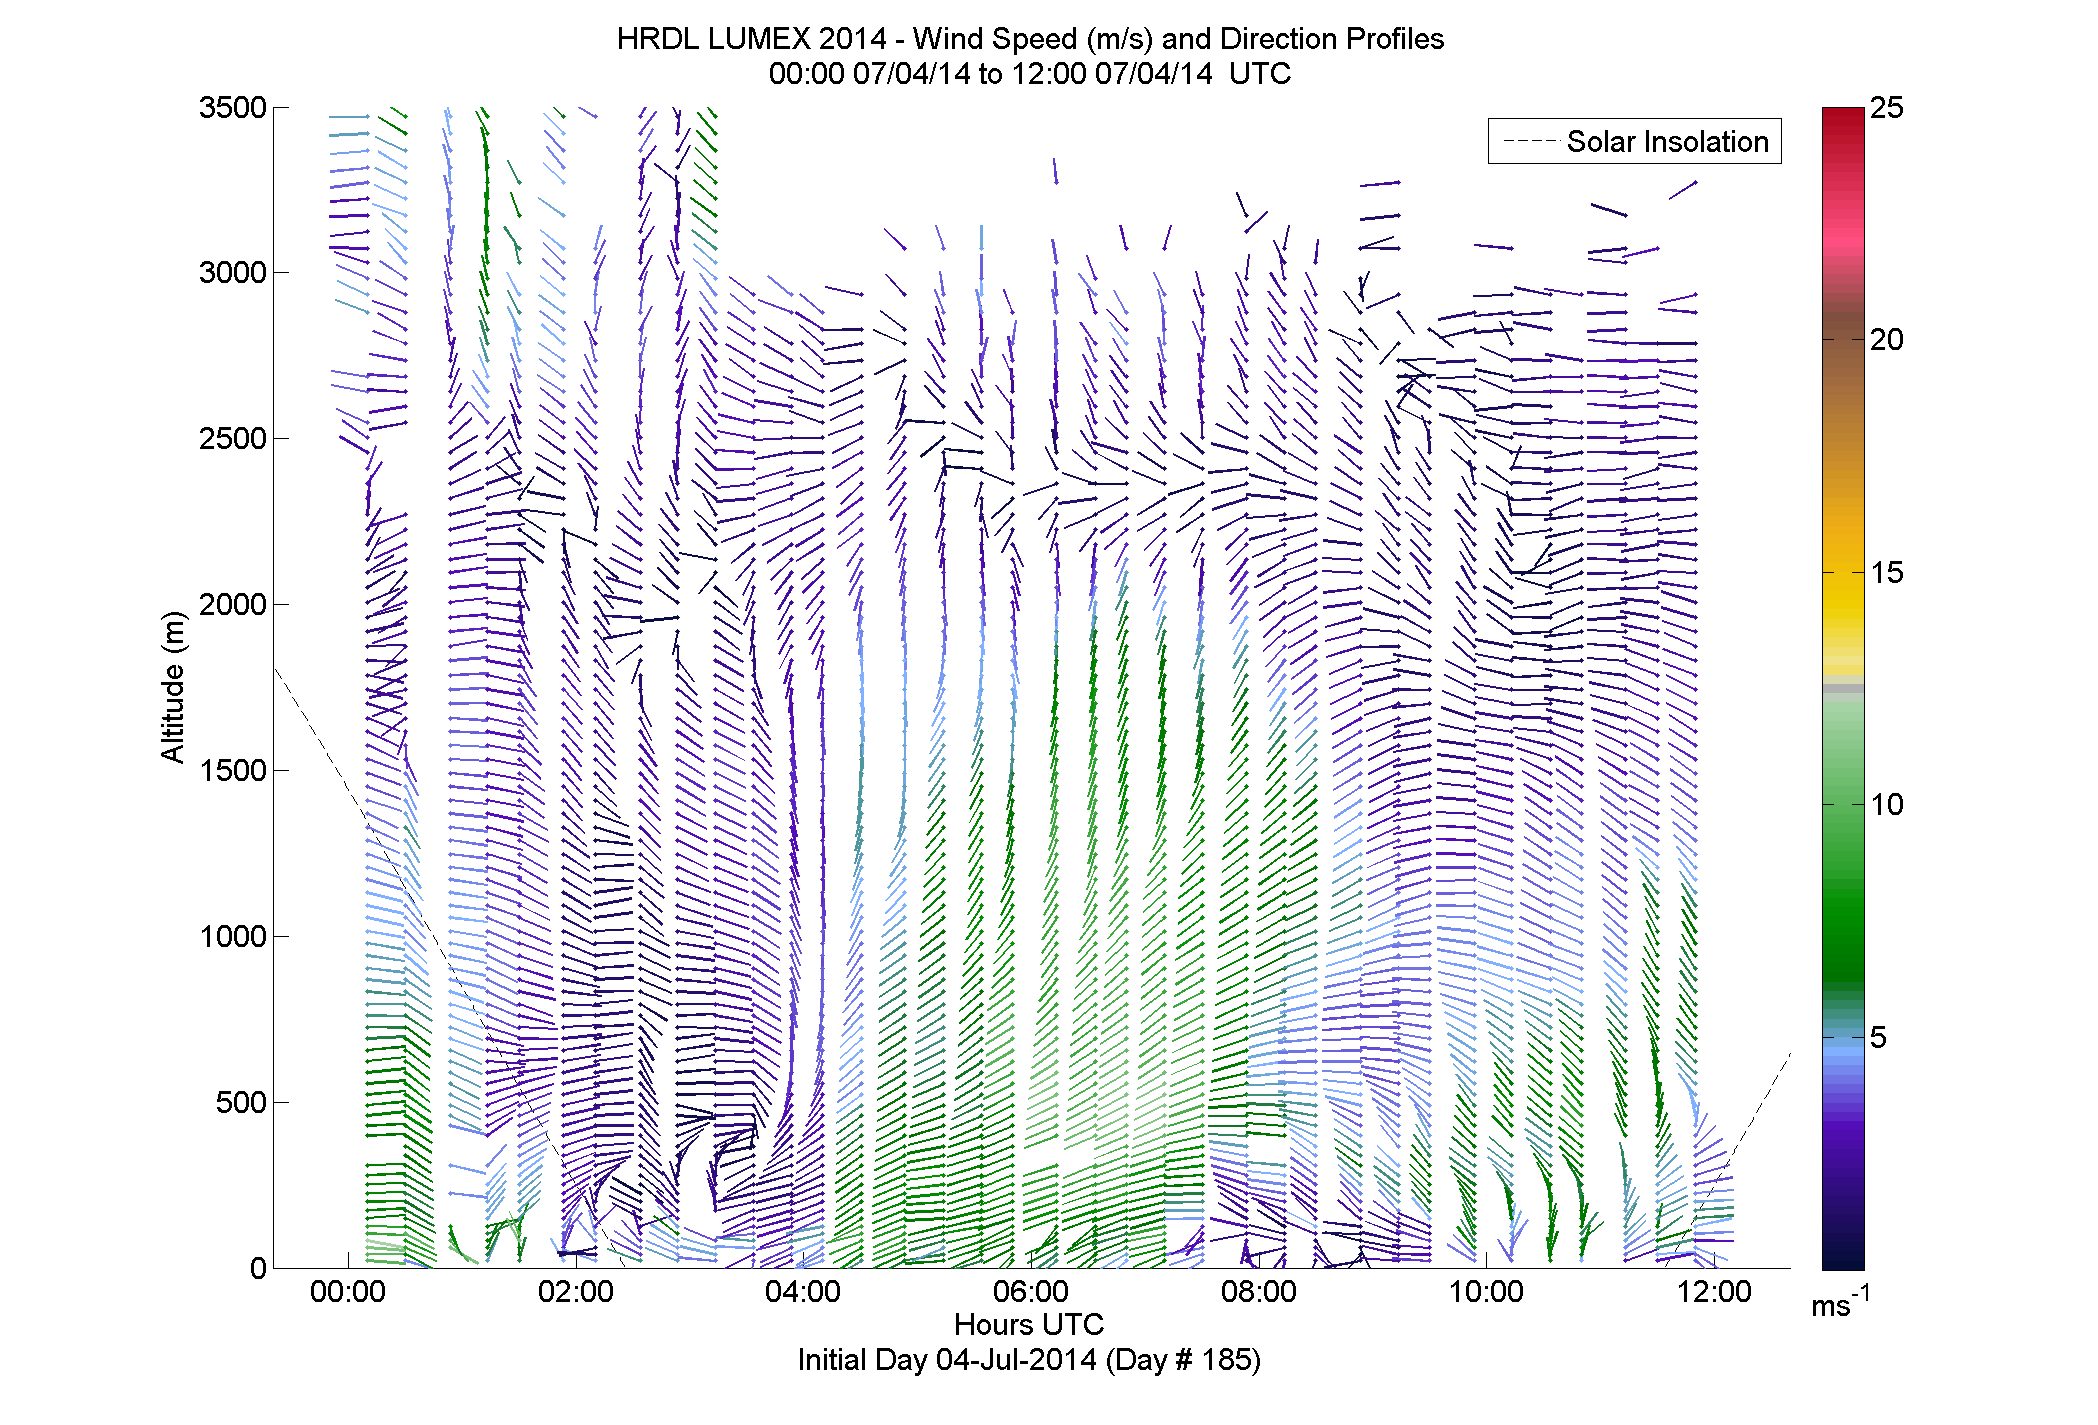 HRDL speed and direction profile - July 4 am